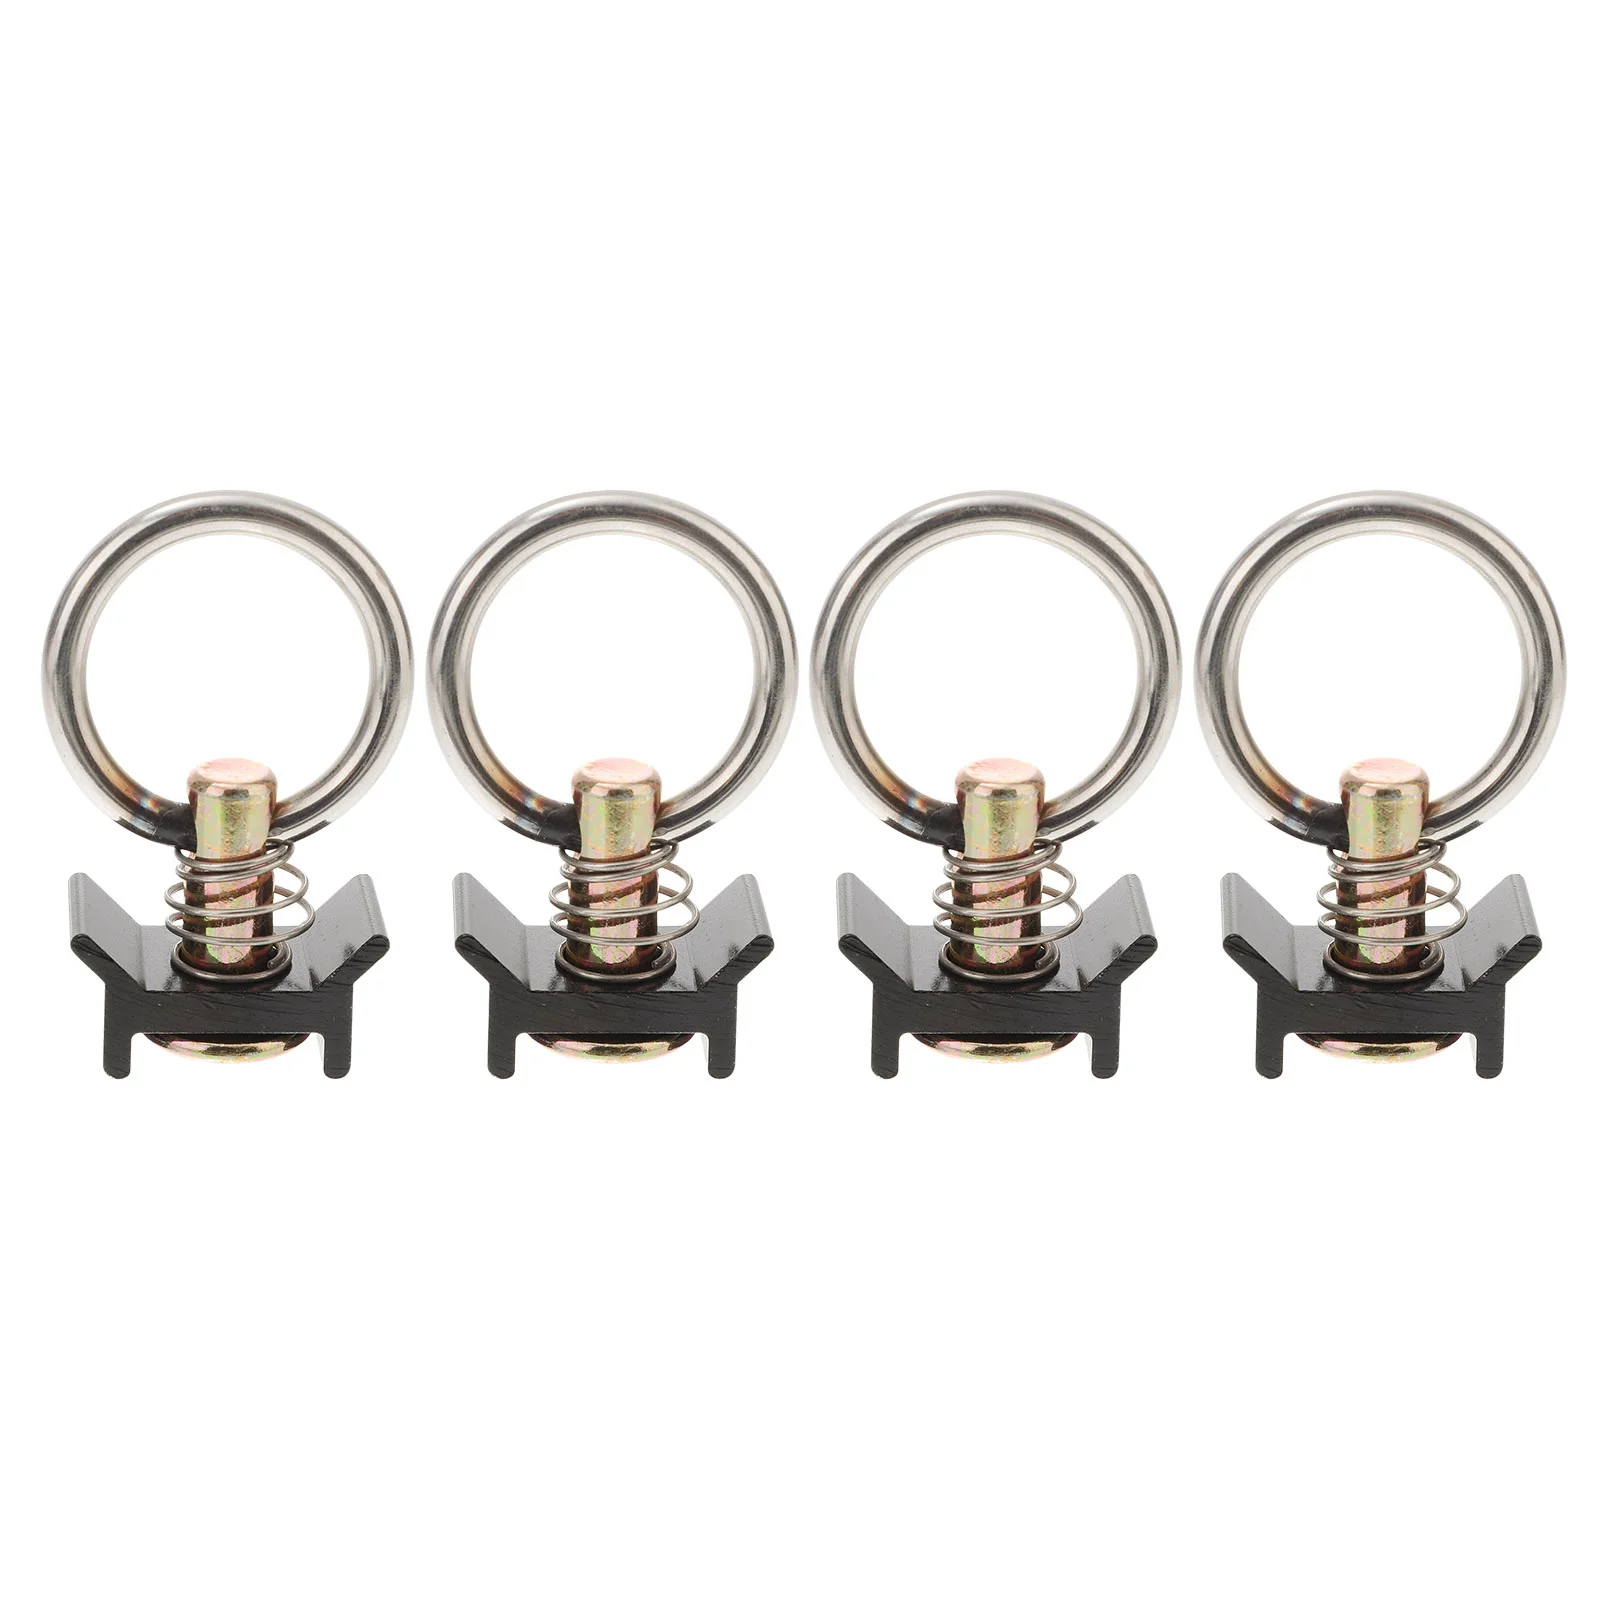 

4 Pcs E Track Accessories L Hook Connector Tie-down Anchor Single Stud Fitting With Round Ring Steel Rails